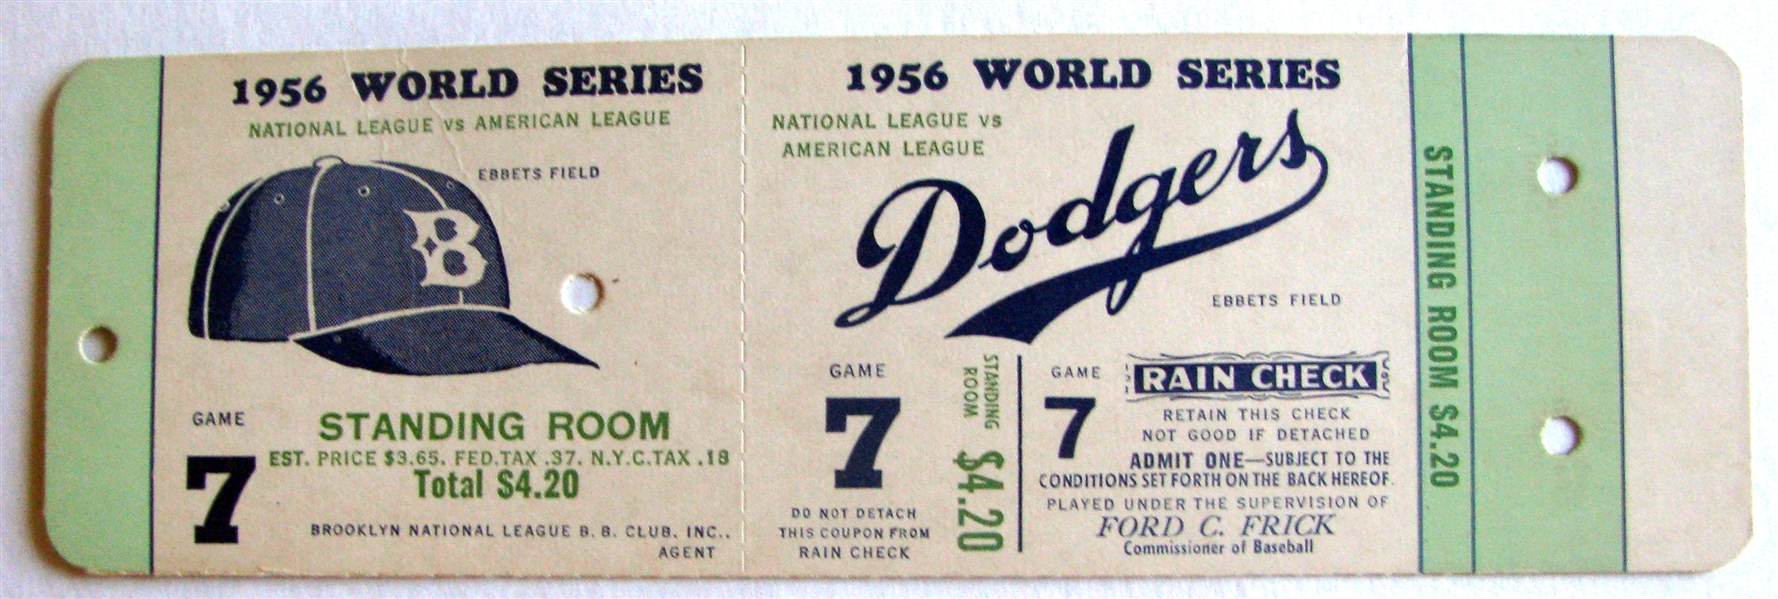 1956 WORLD SERIES FULL TICKET  GAME 7 - JACKIE ROBINSONS LAST GAME